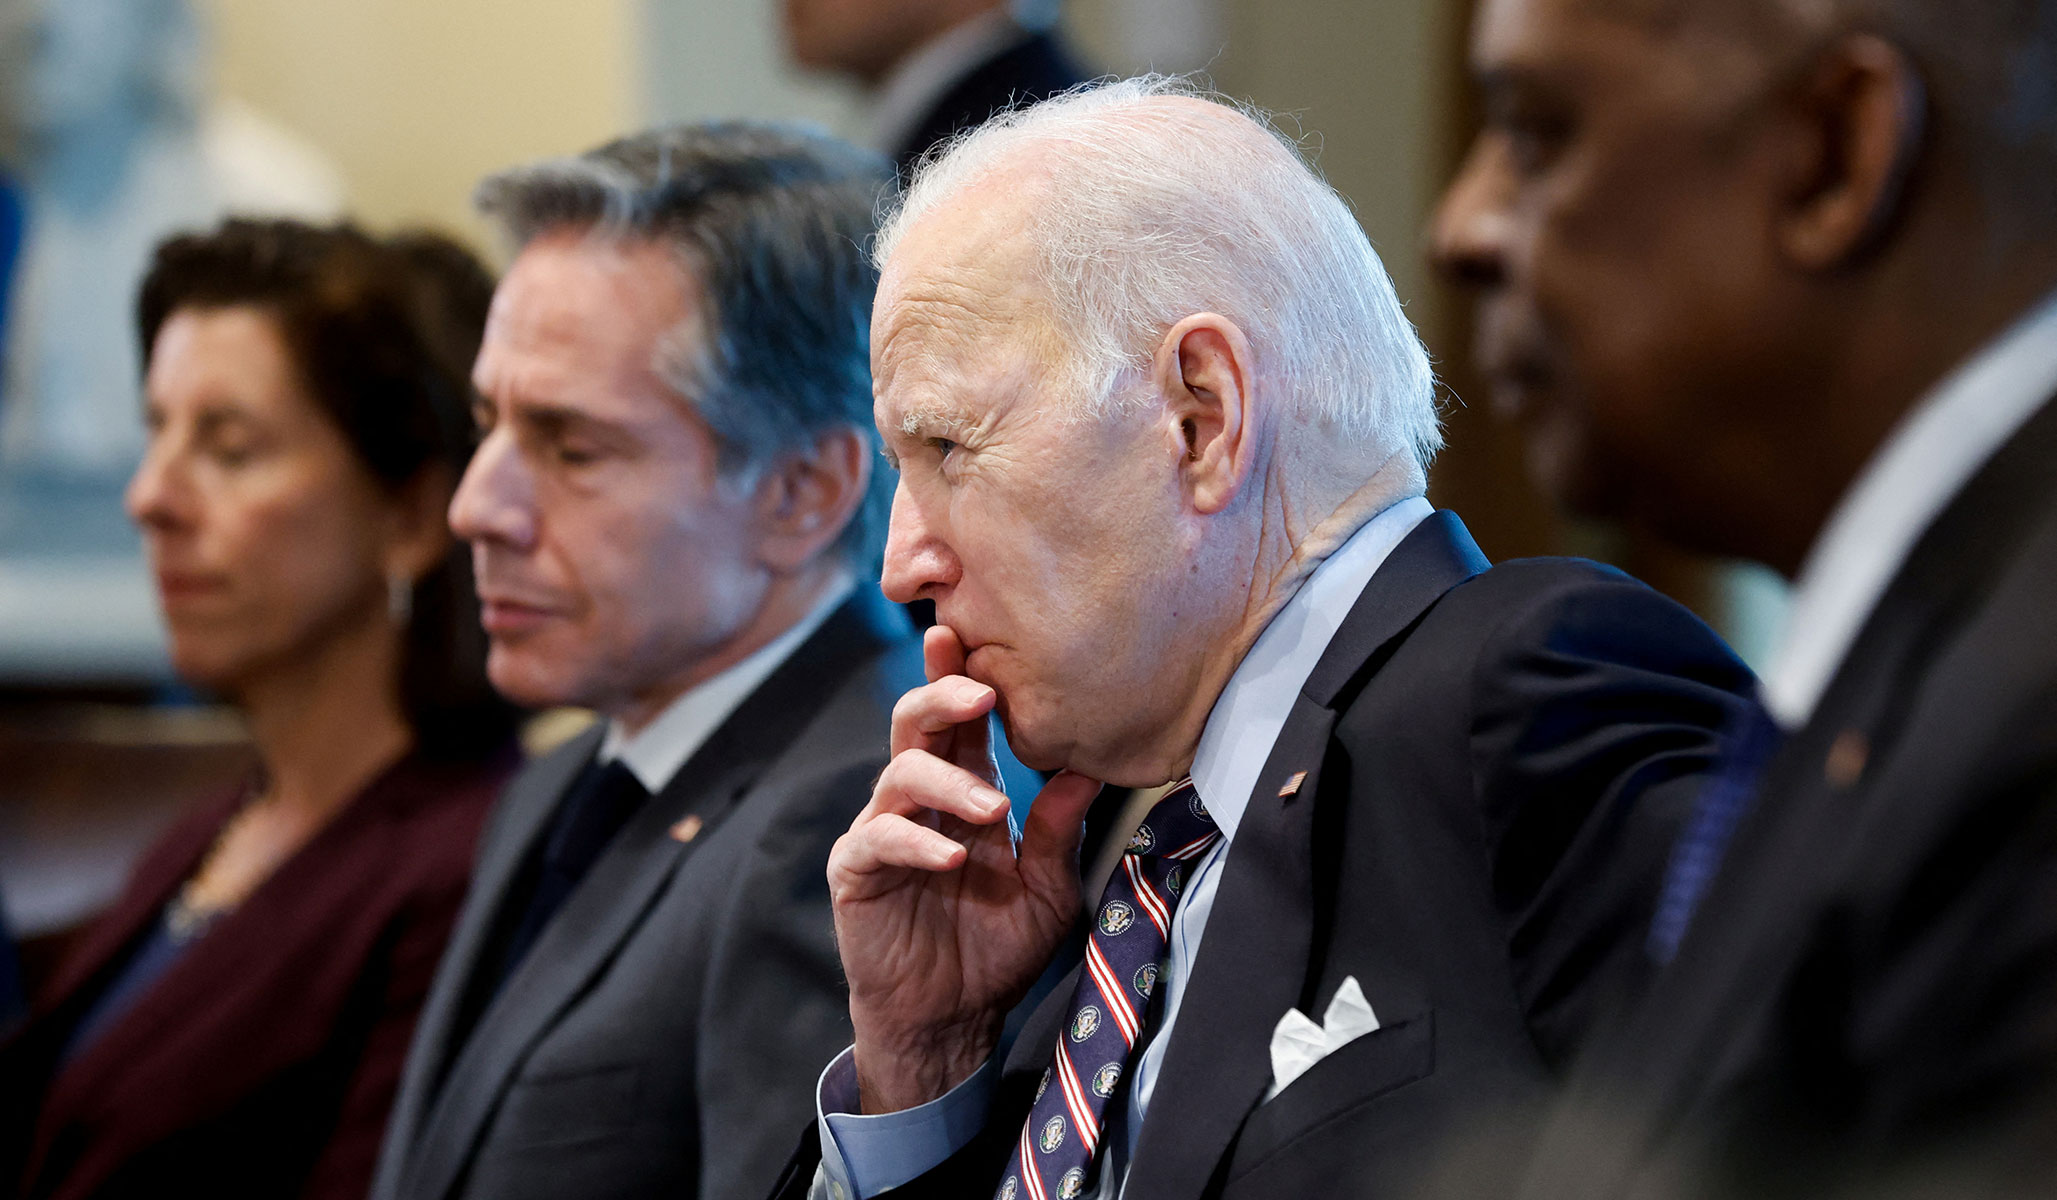 Biden Willing to Take Military Action if Iran Nuclear Talks Failed